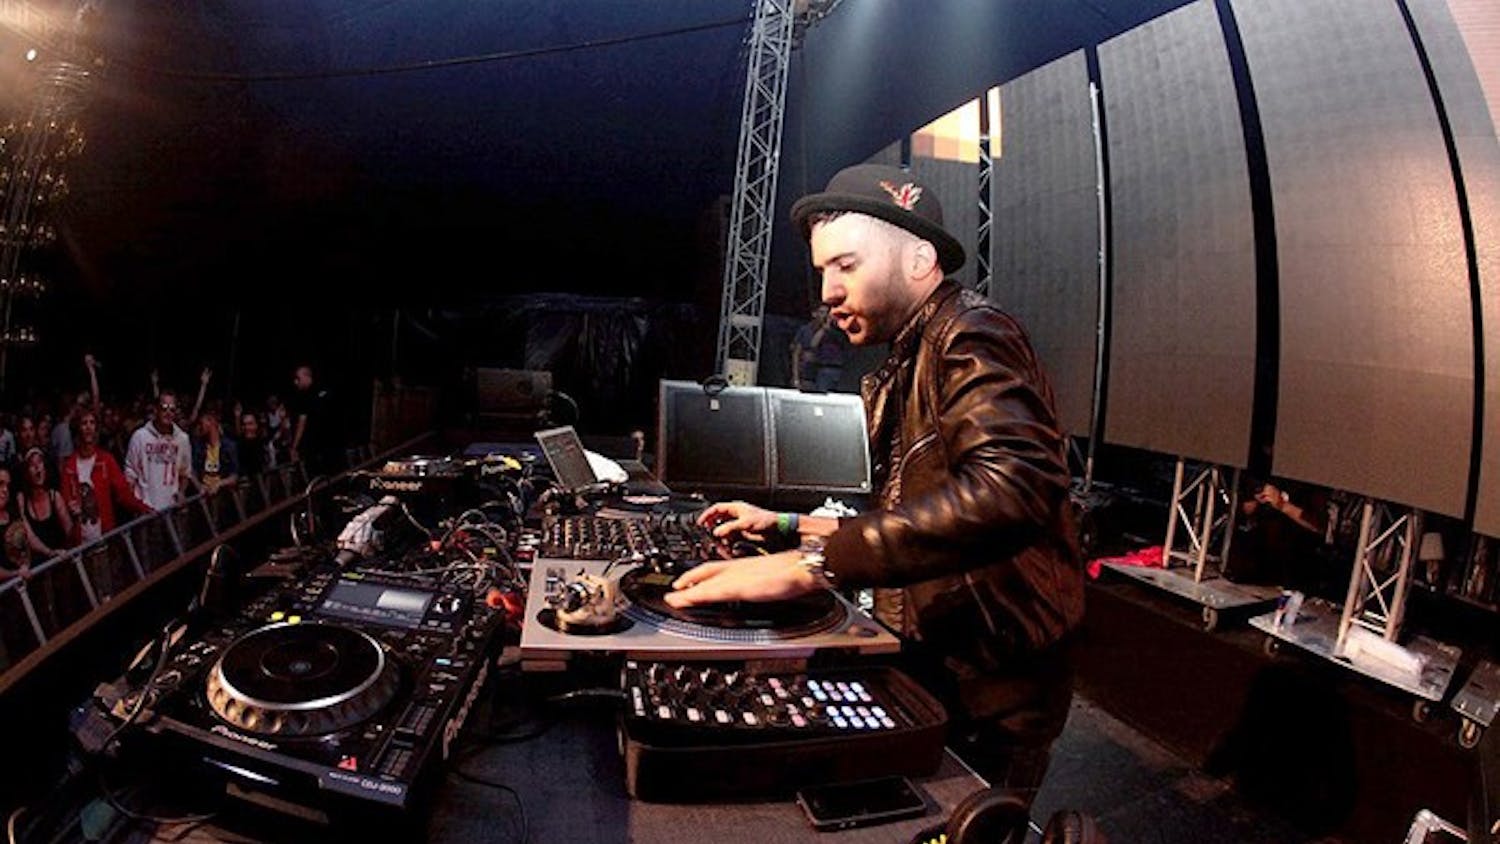 A-Trak, who previously toured with Kanye West and started his own record label, will perform at AU Dec. 1 at 9:30 p.m.